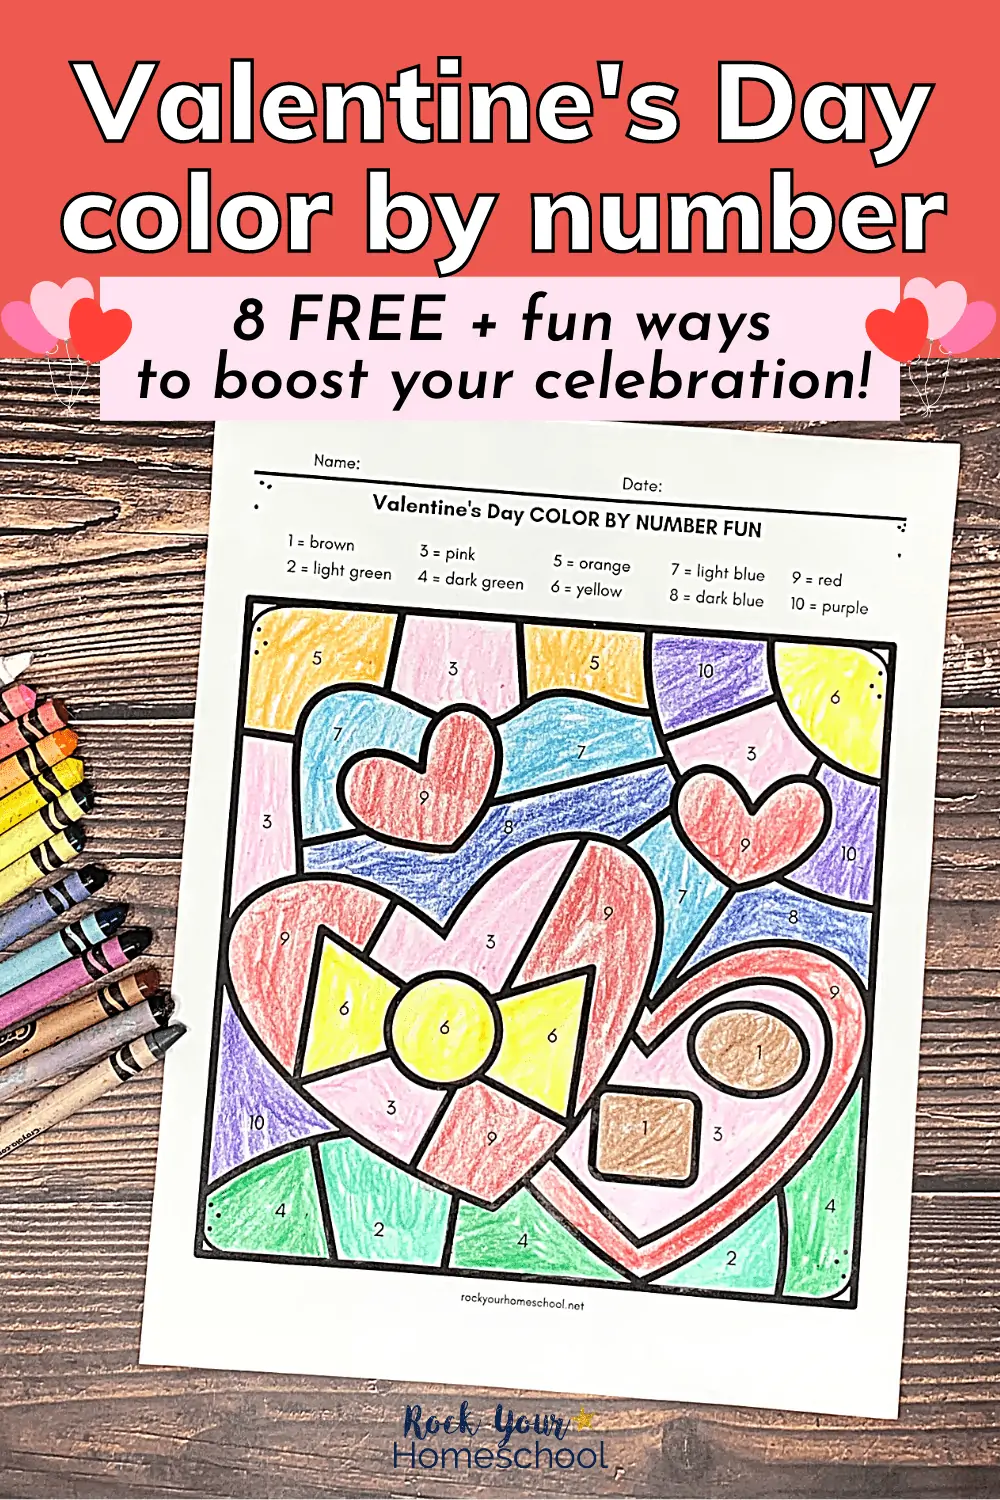 Valentine’s Day Color by Number Pages for Special Holiday Fun (Free)